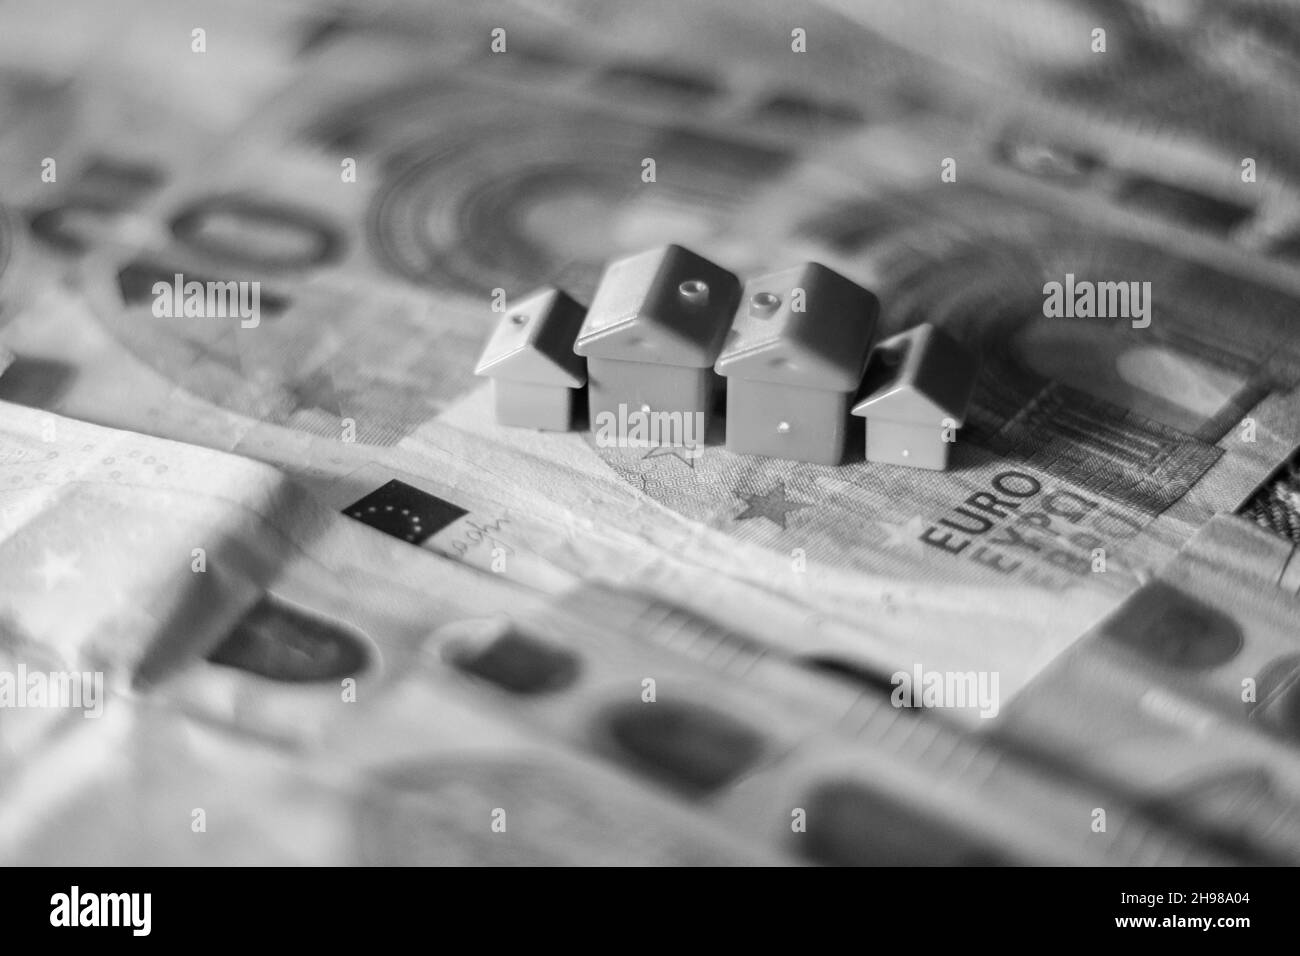 table covered with Euro banknotes with houses on top. Real estate investment concept Stock Photo